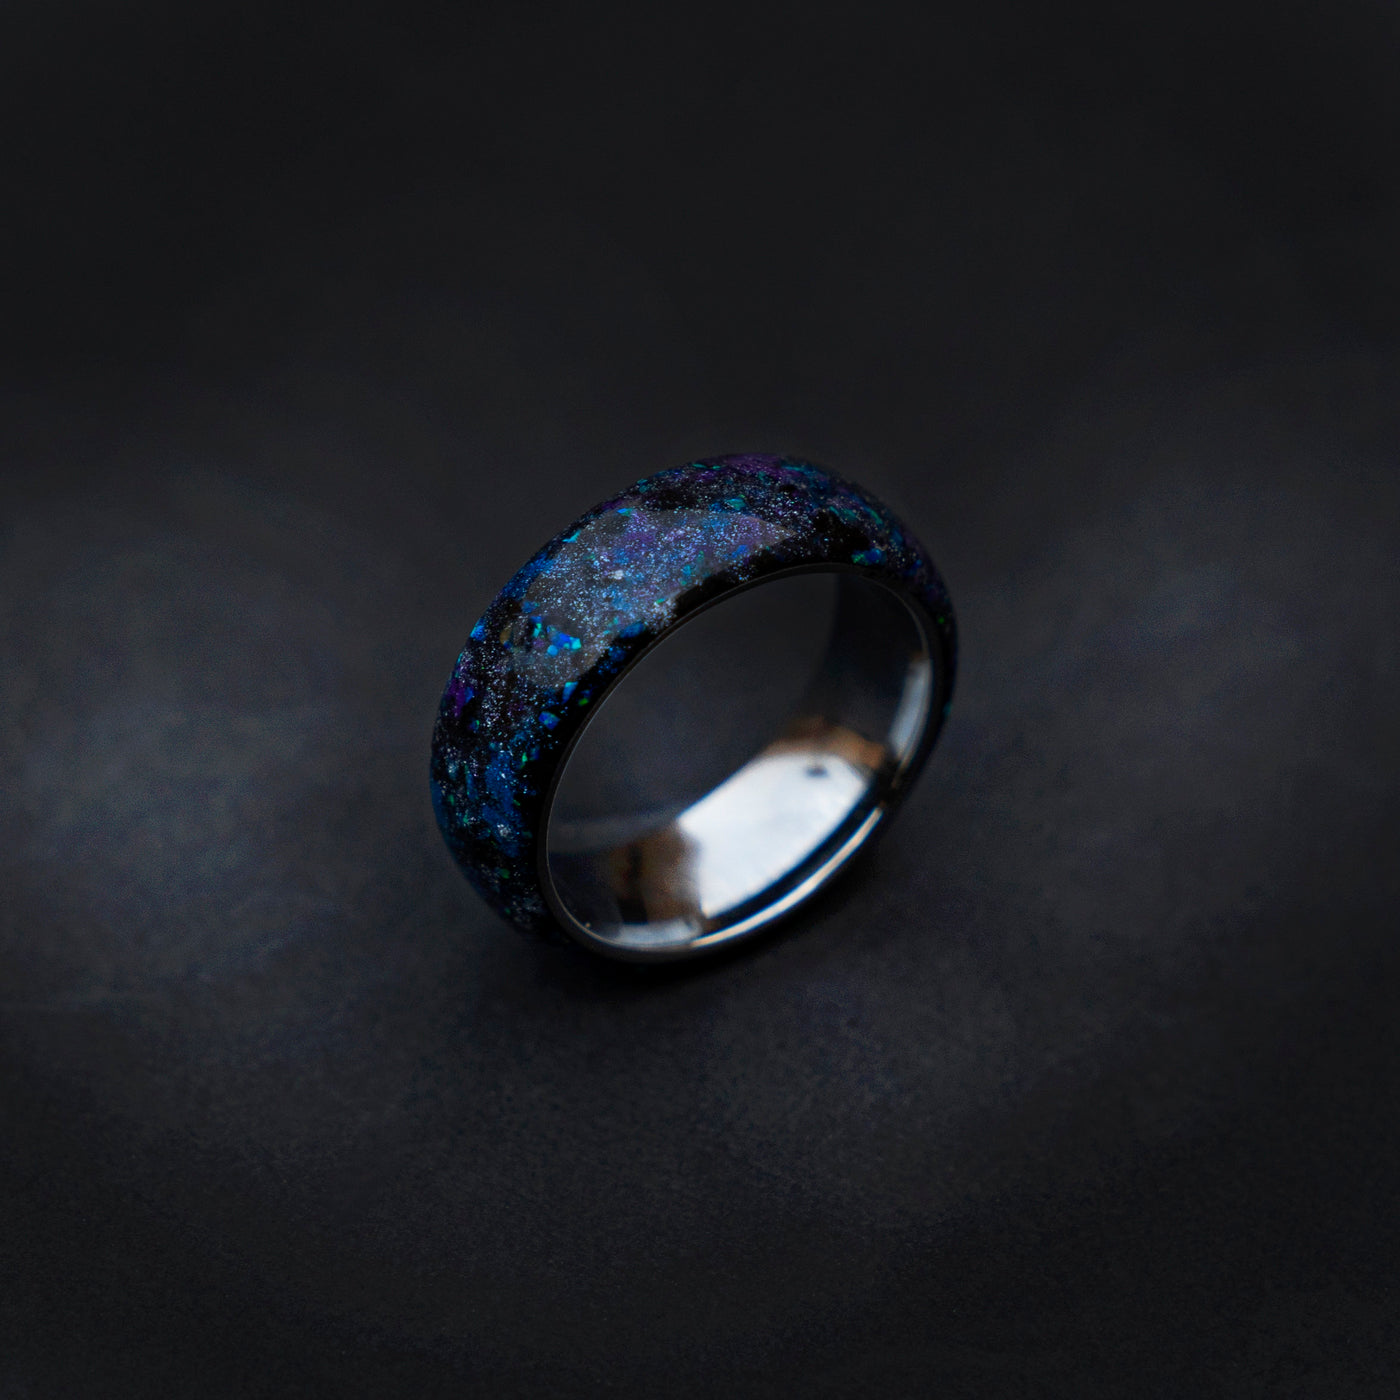 The Ultimate Galaxy opal space nebula ring with glow in the dark pigments, handmade wedding band, meteorite ring, mens wedding band | Decazi - Decazi